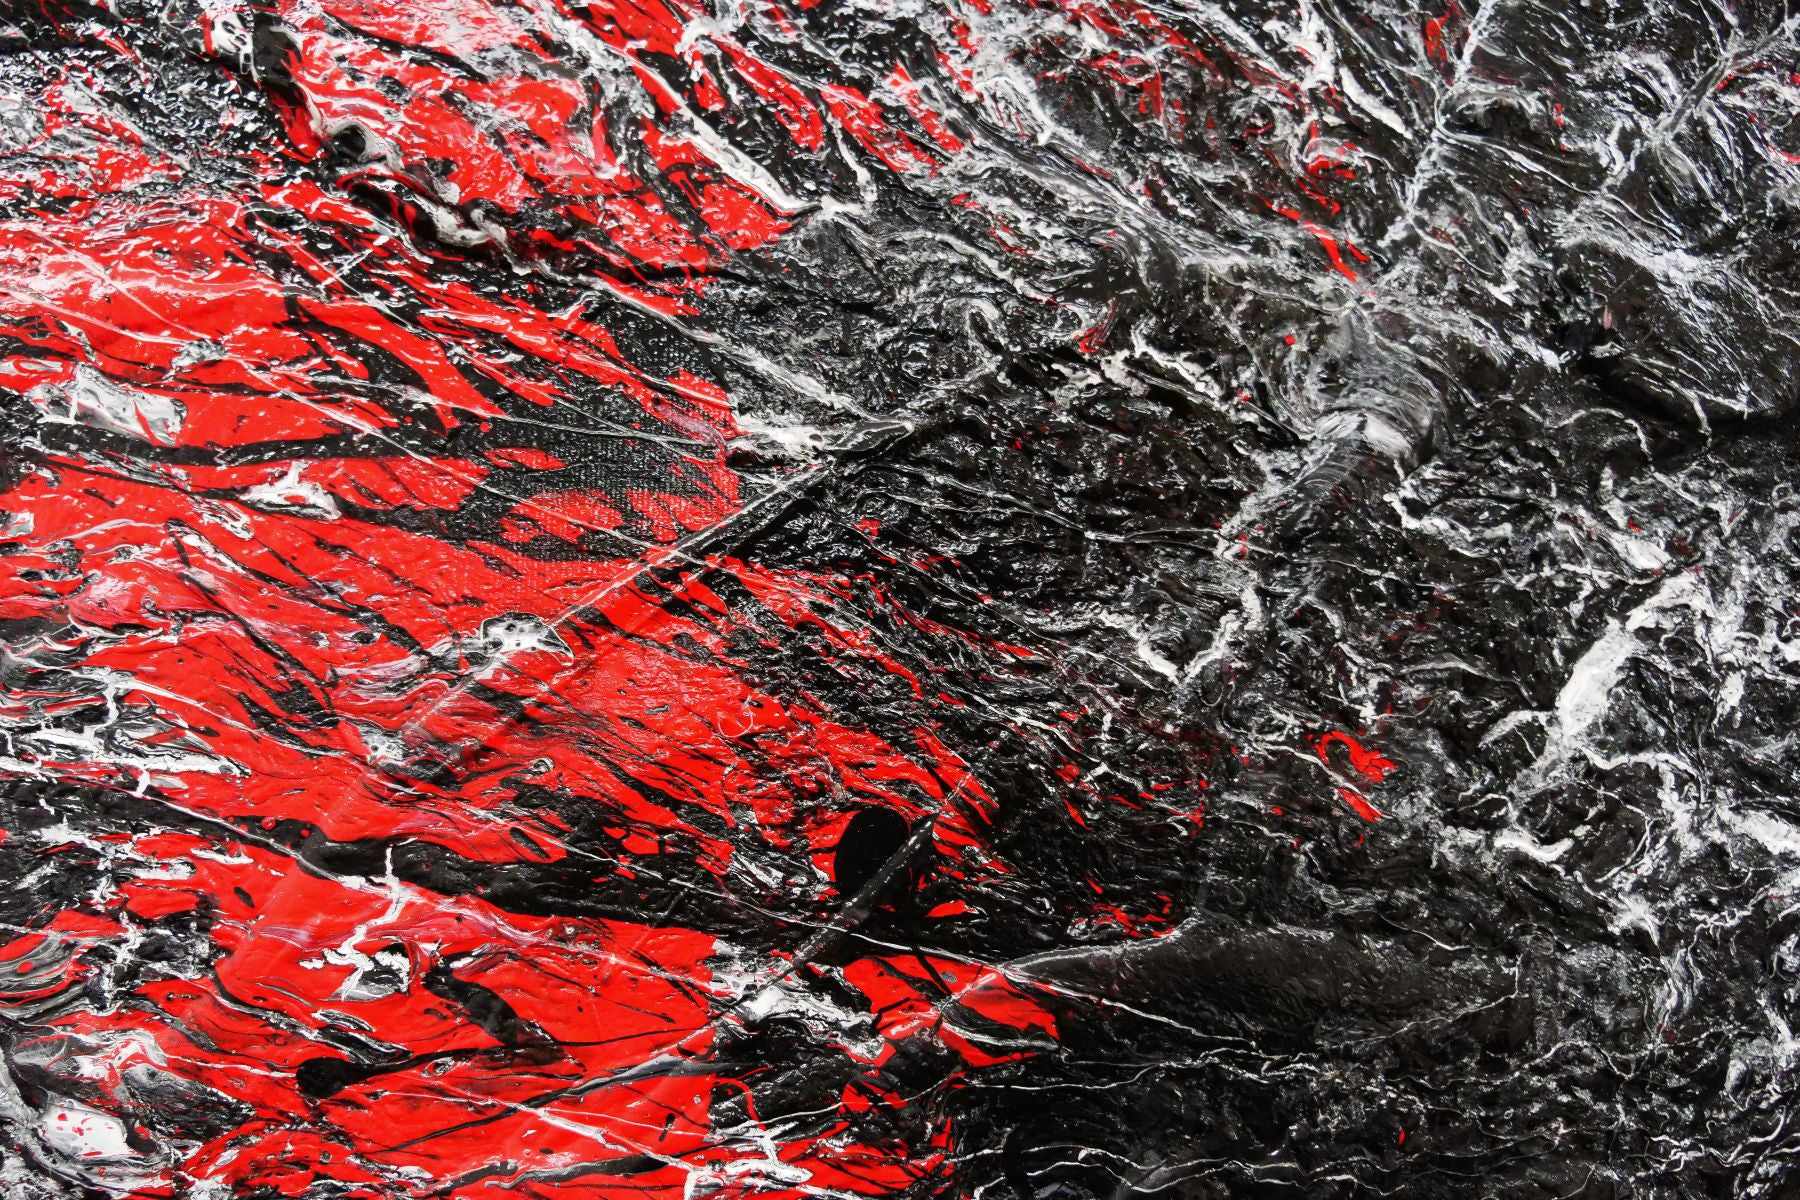 Orgasmic 120cm x 120cm Red Black White Textured Abstract Painting